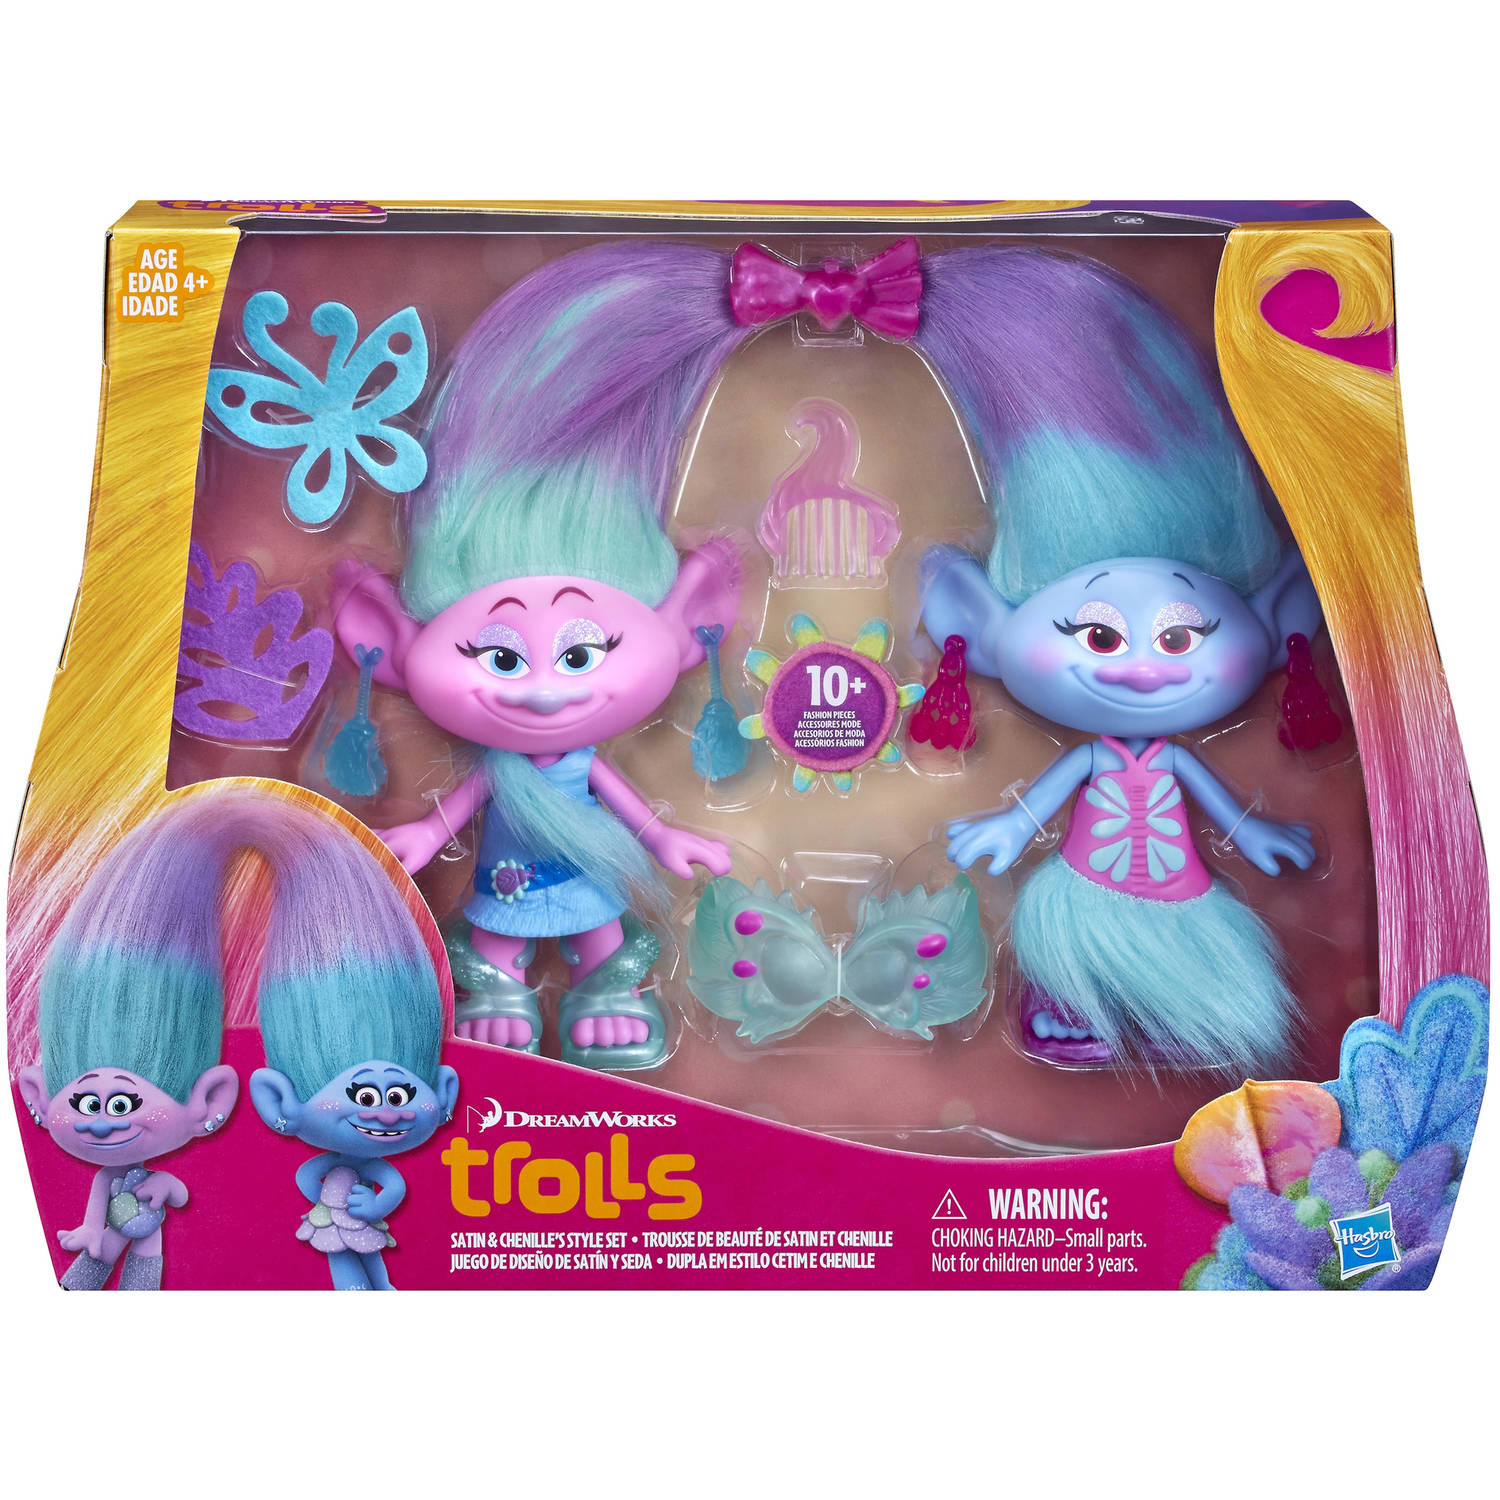 DreamWorks Trolls Satin and Chenille's Style Set - image 2 of 13